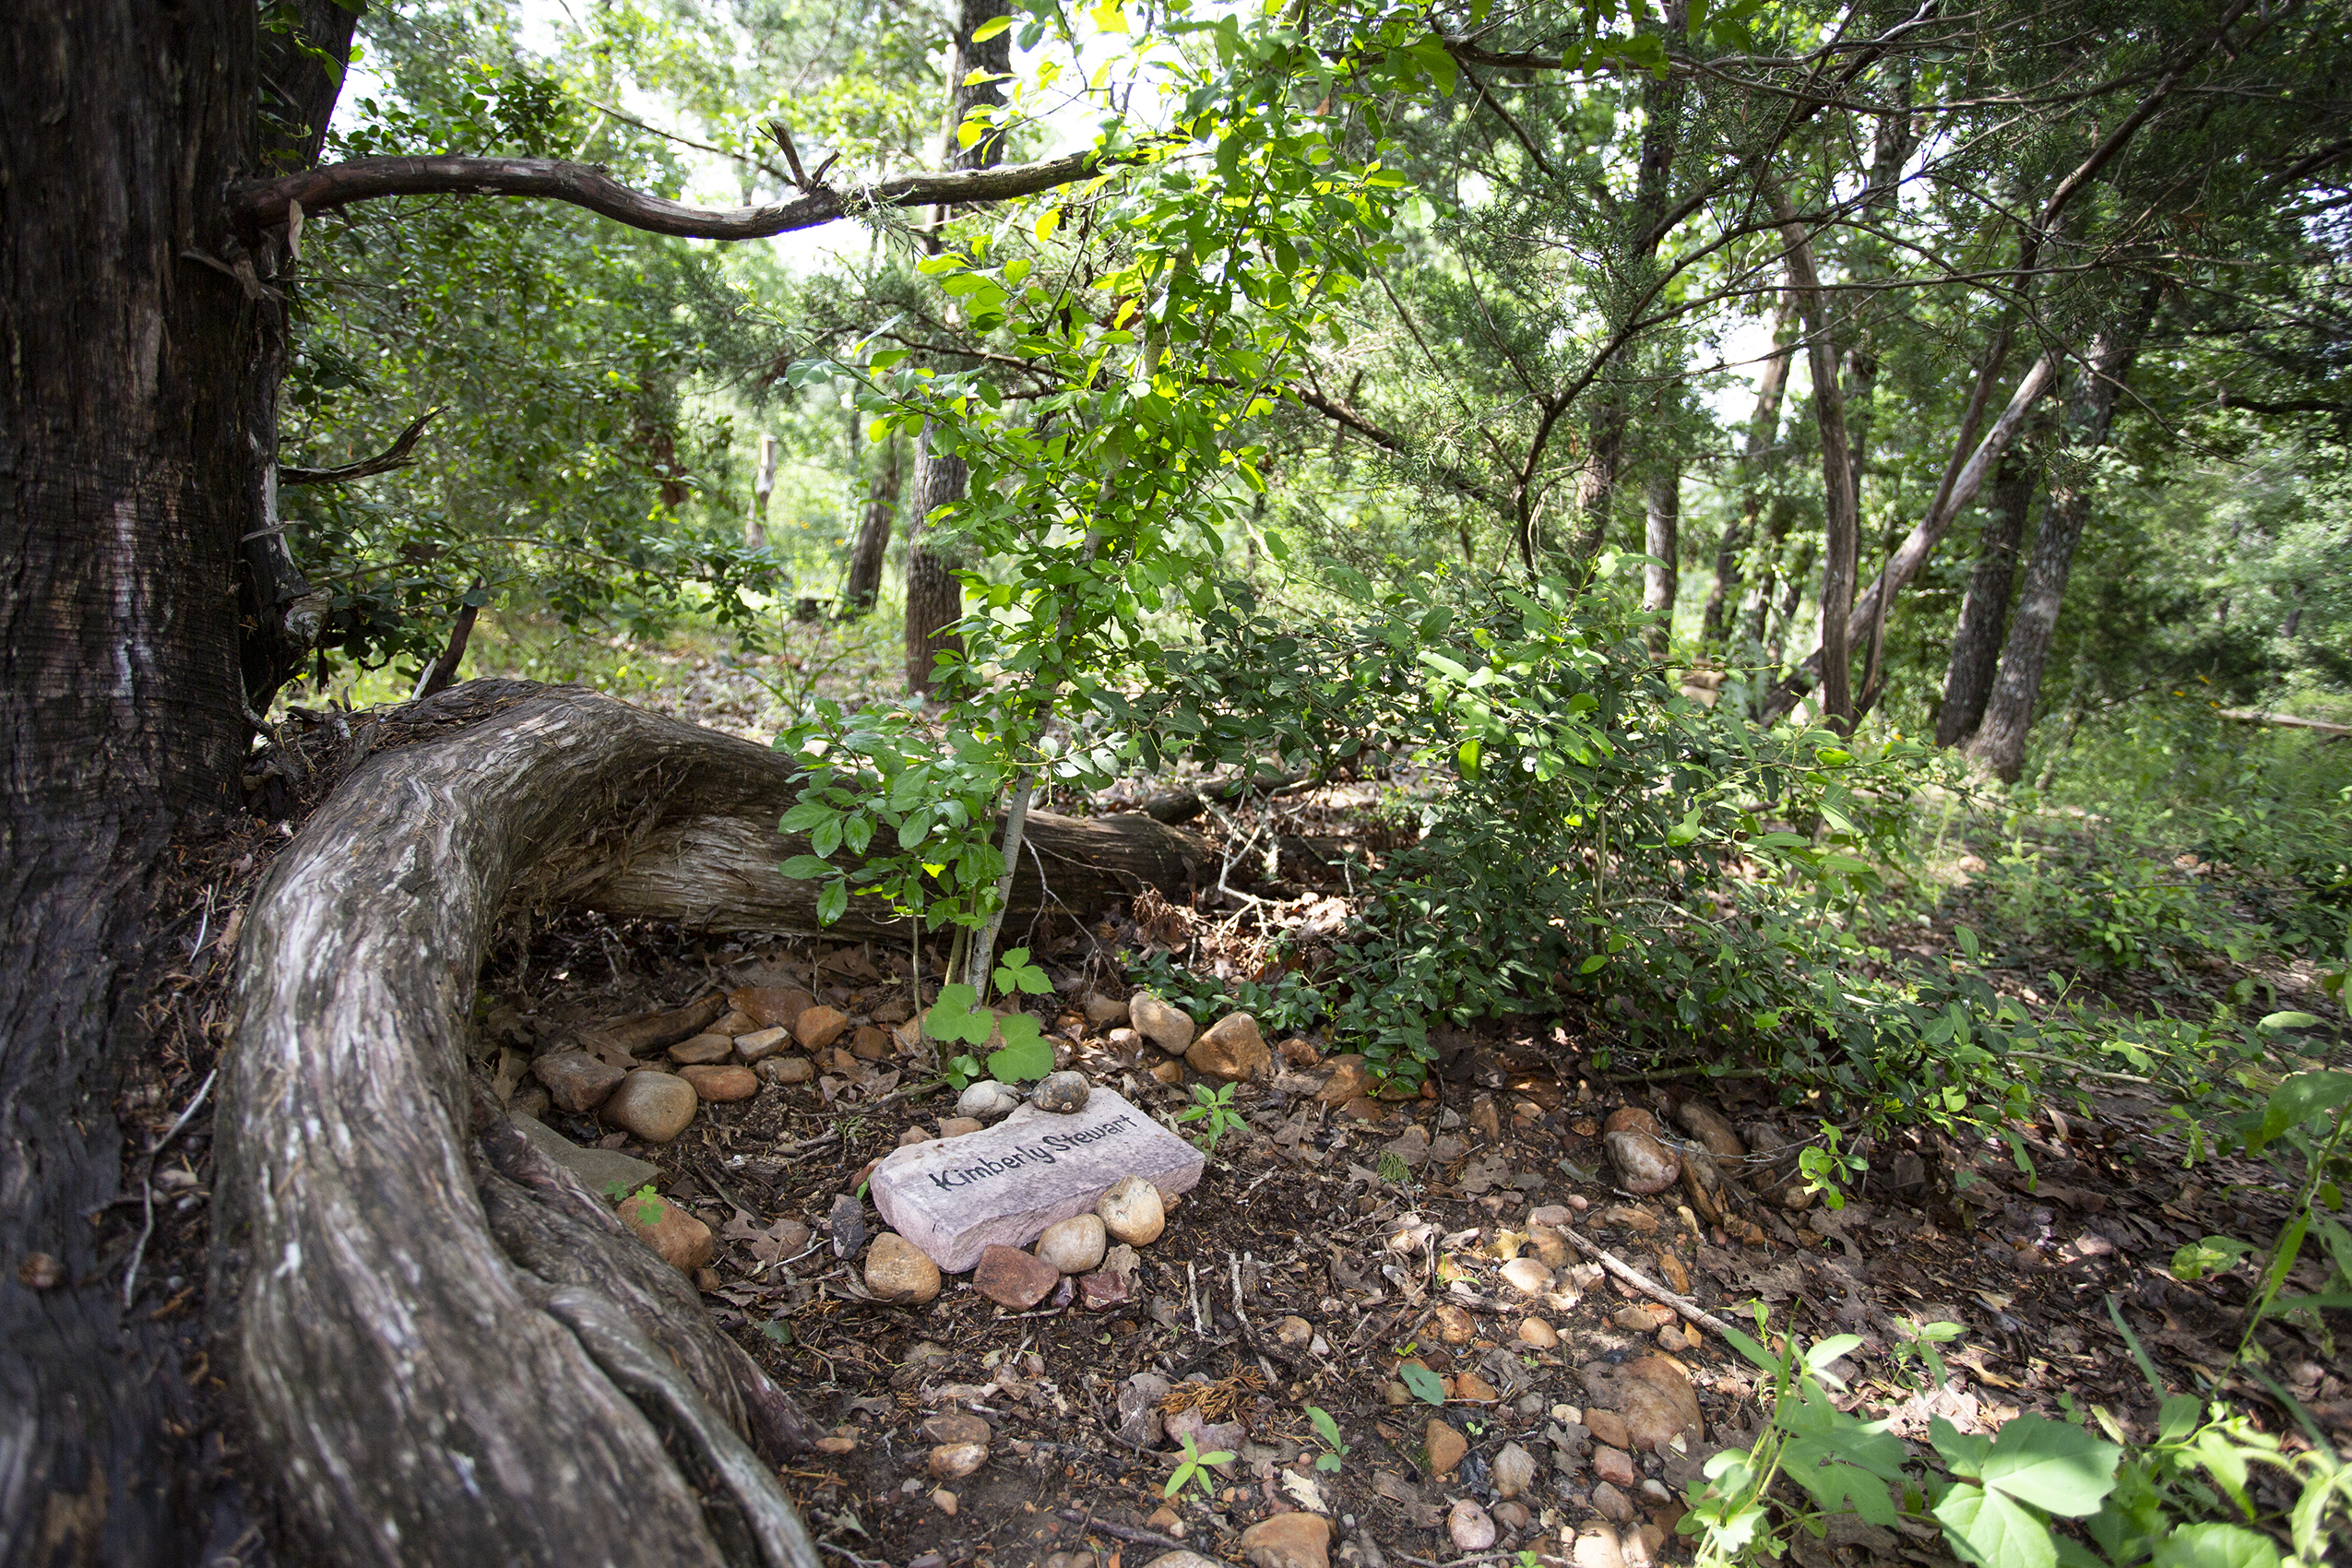 At the Eloise Woods Natural Burial Park in Bastrop, bodies are buried in biodegradable containers.